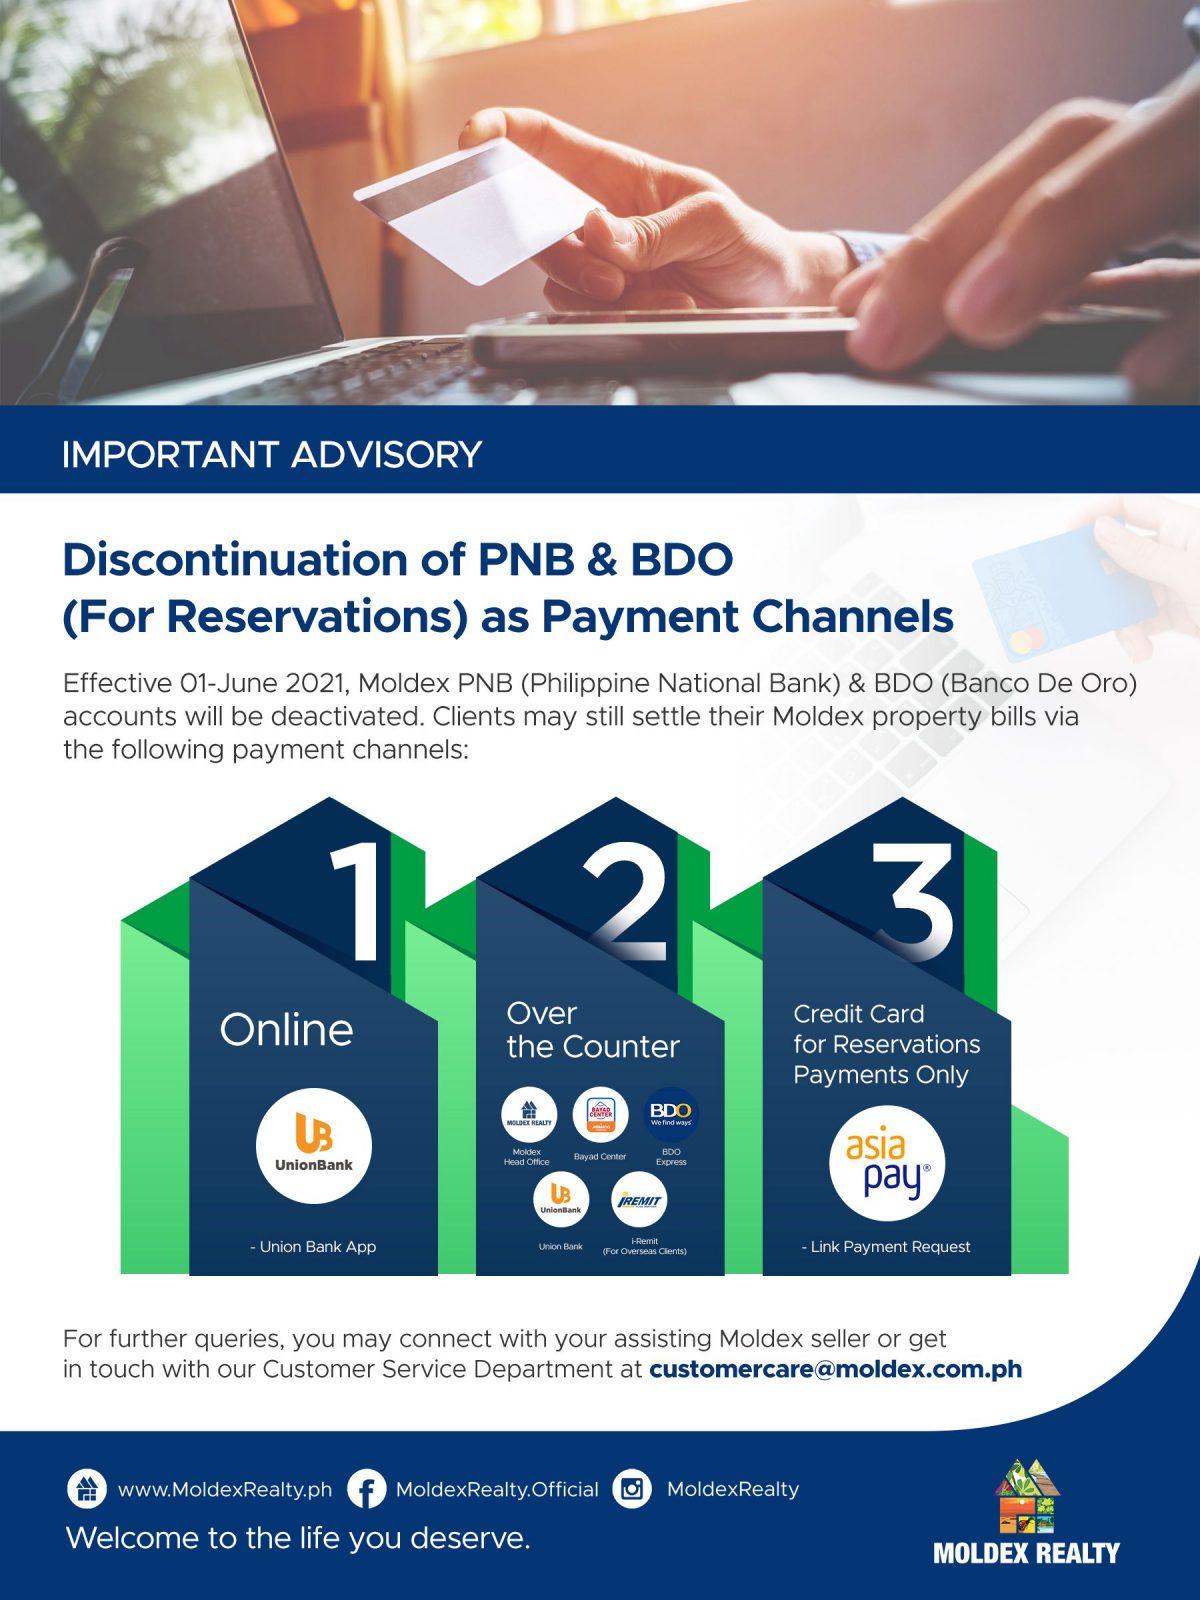 Important Advisory: Discontinuation of PNB & BDO (For Reservations) as Payment Channels